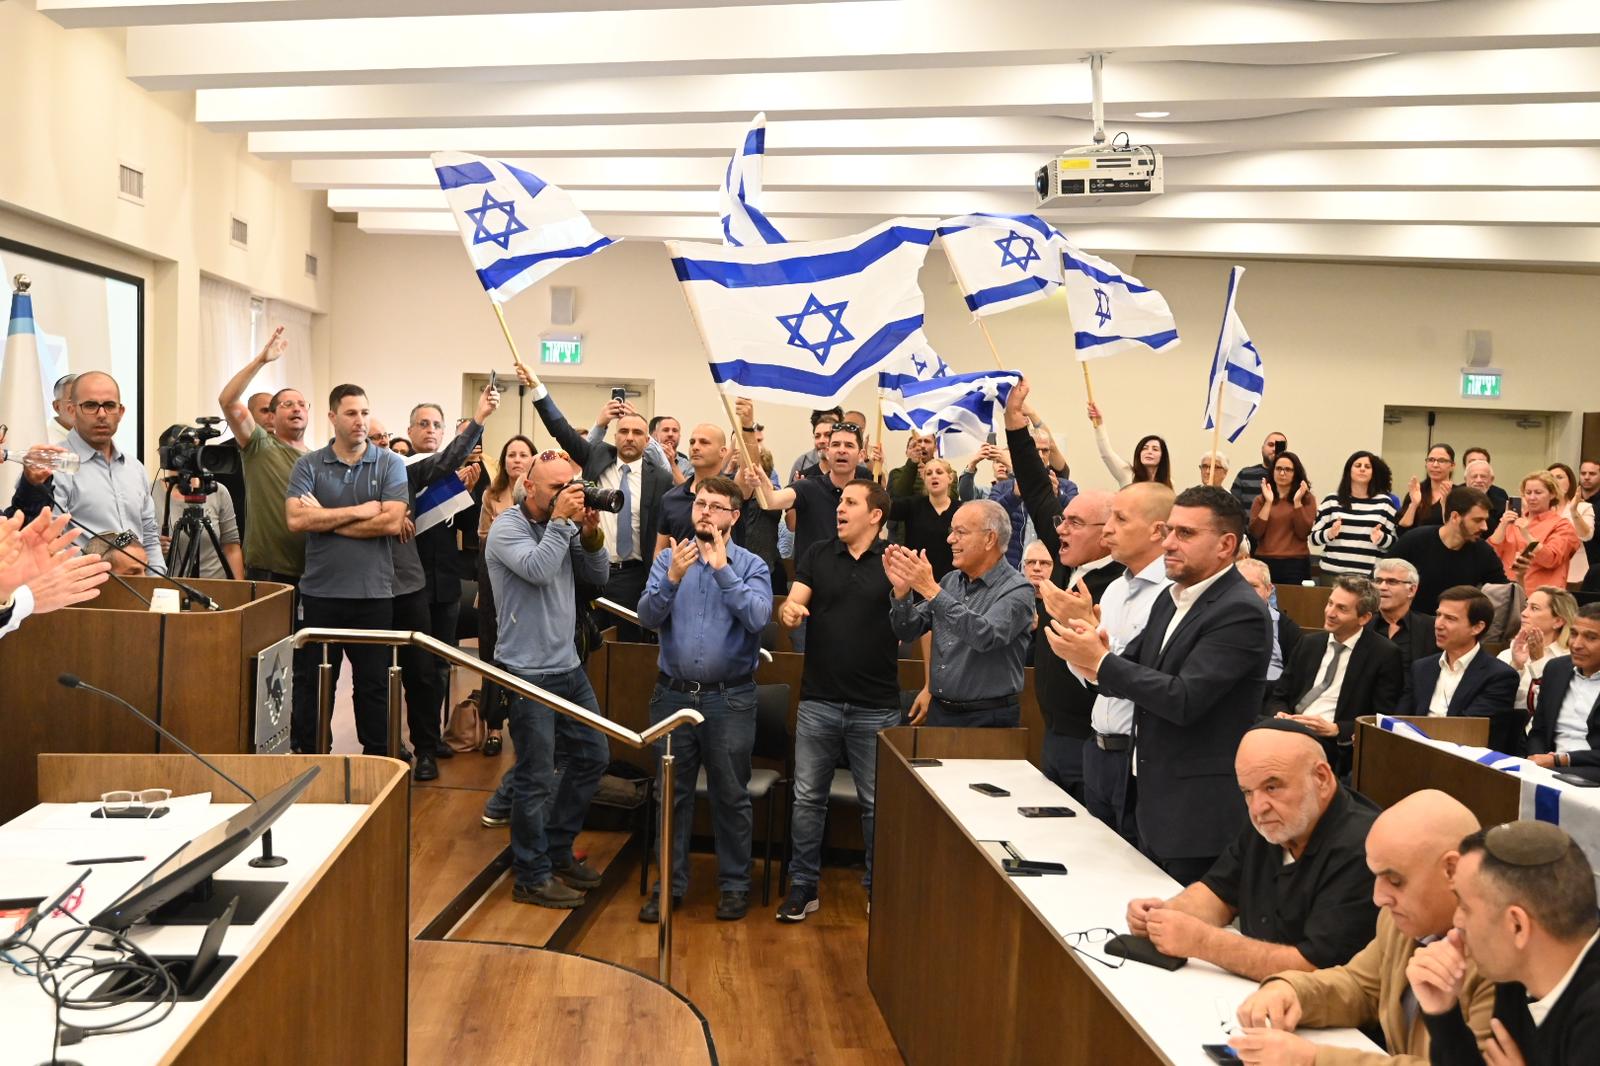 Attendees wave Israeli flags at the press conference announcing the strike (Photo: Histadrut spokesperson).